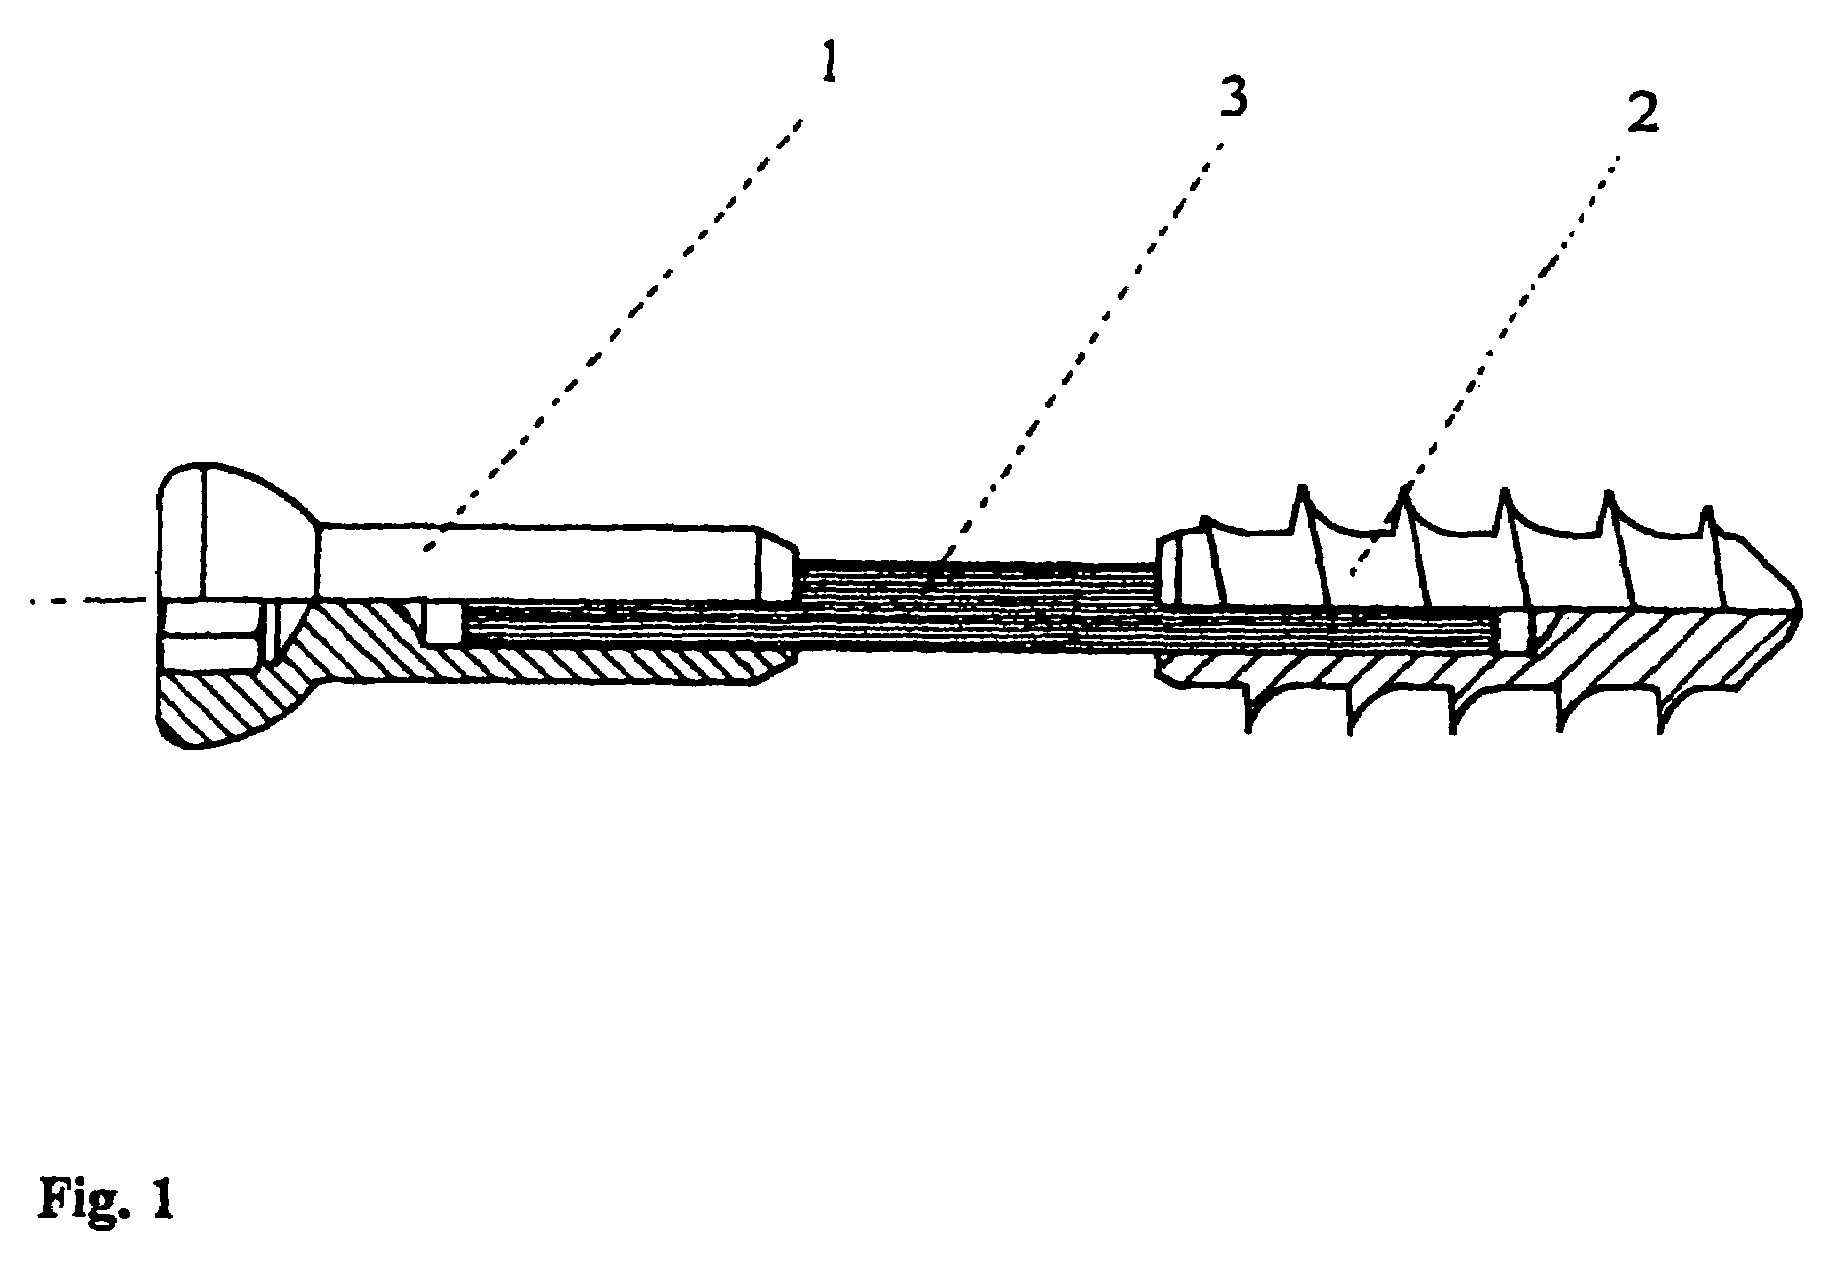 Implantable screw for stabilization of a joint or a bone fracture